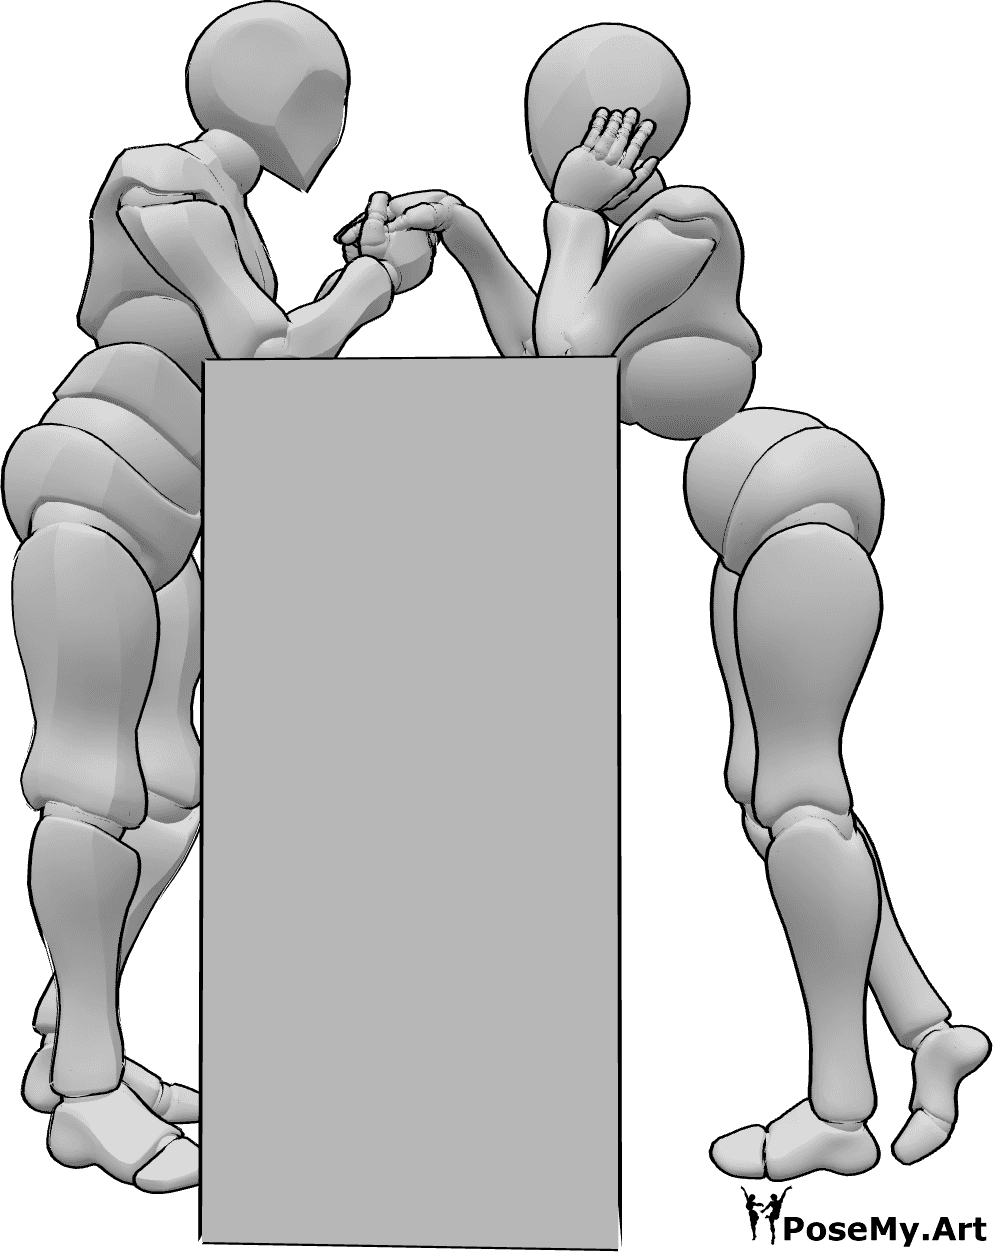 Pose Reference- Romantic hand kiss pose - Female and male are leaning on the bar table, the male is holding the female's hand with two hands and is about to kiss it